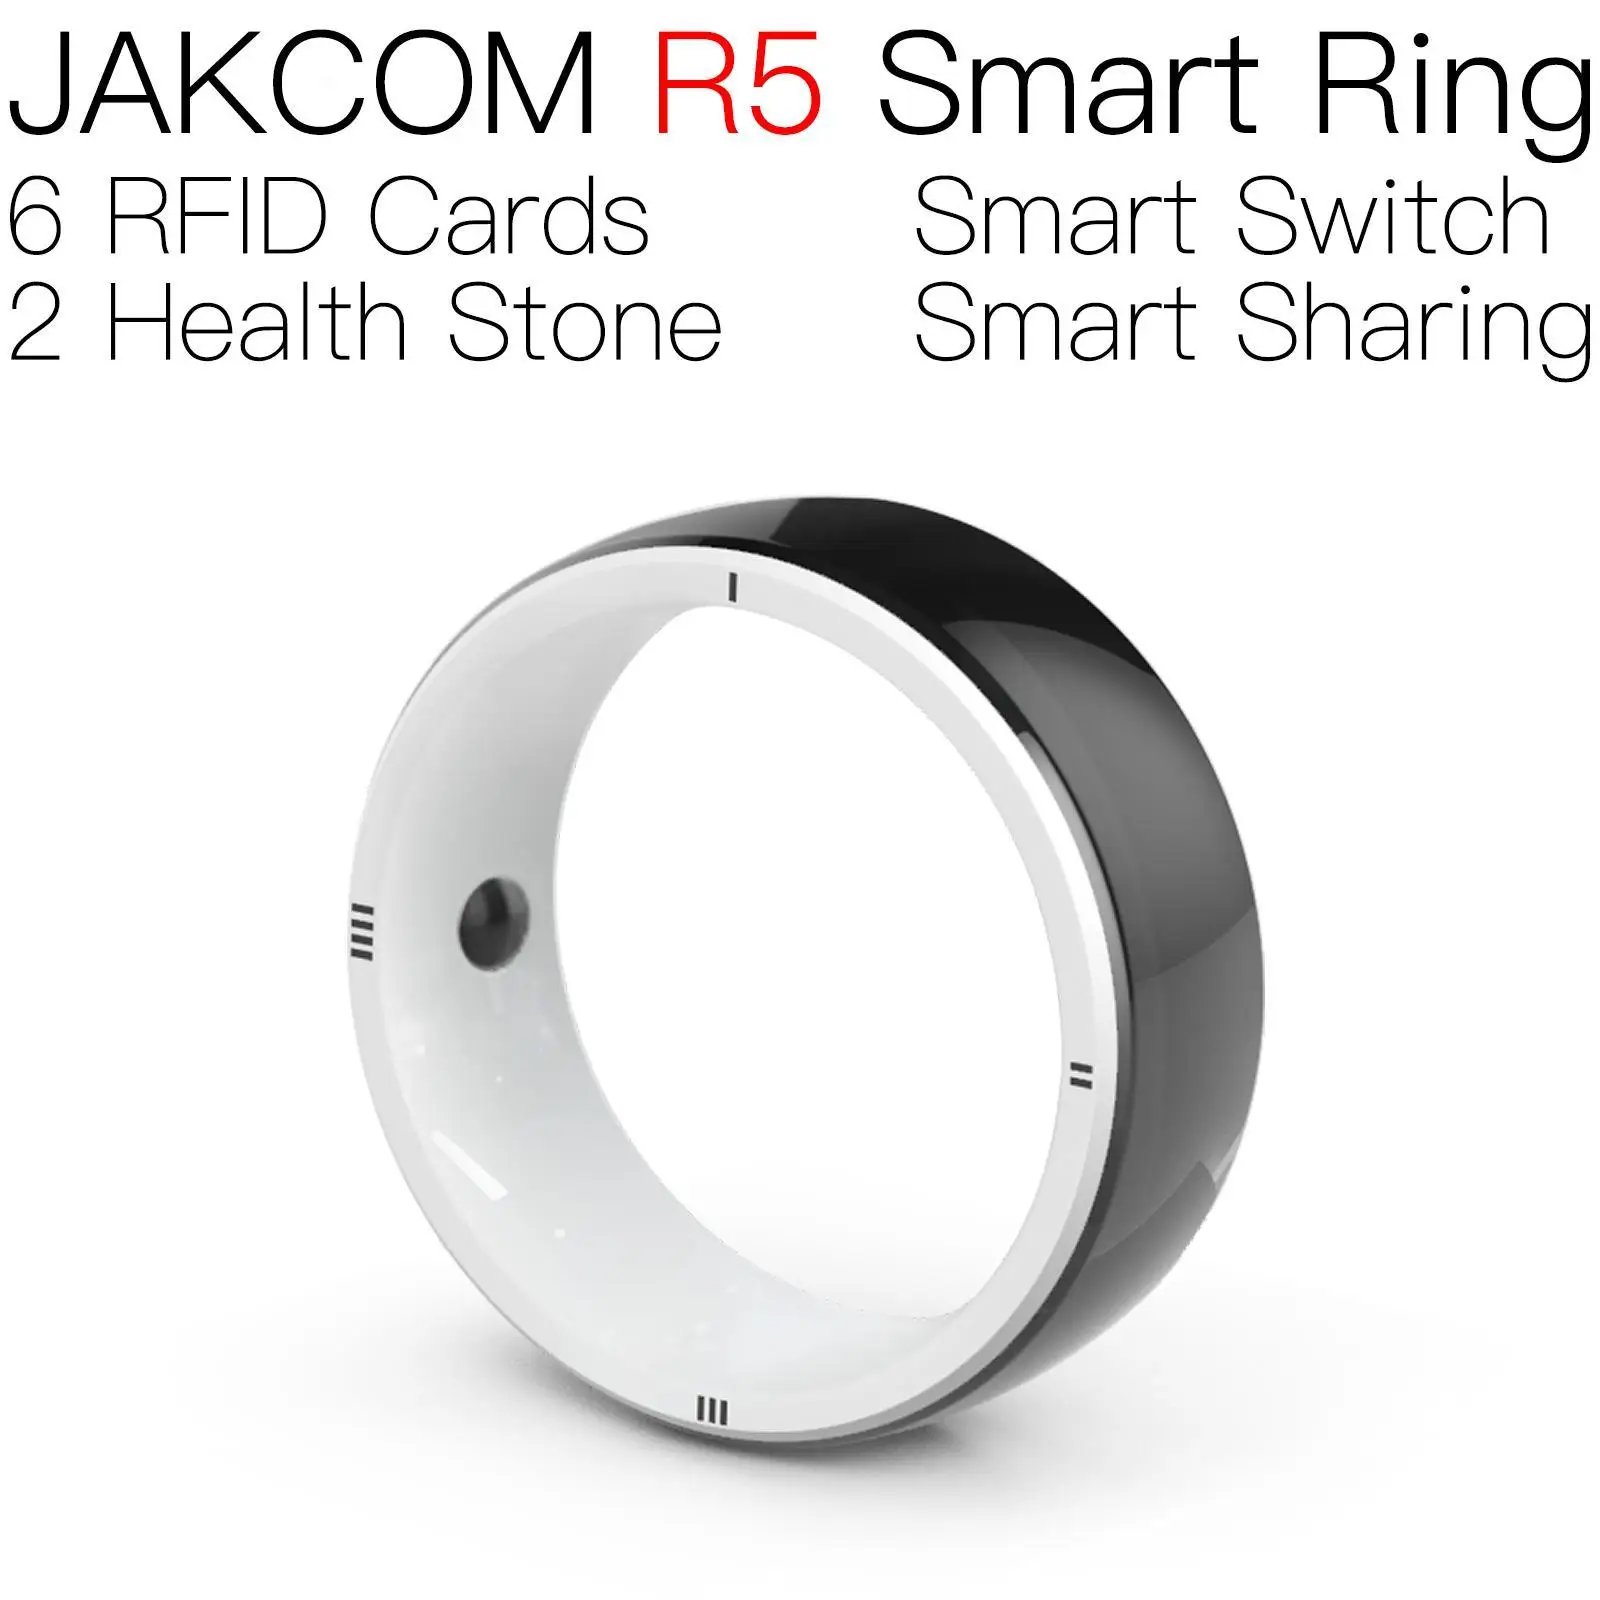 

JAKCOM R5 Smart Ring Super value than rs485 opto isolator active rfid module uhf tag uid s50 1k mct card colder car write